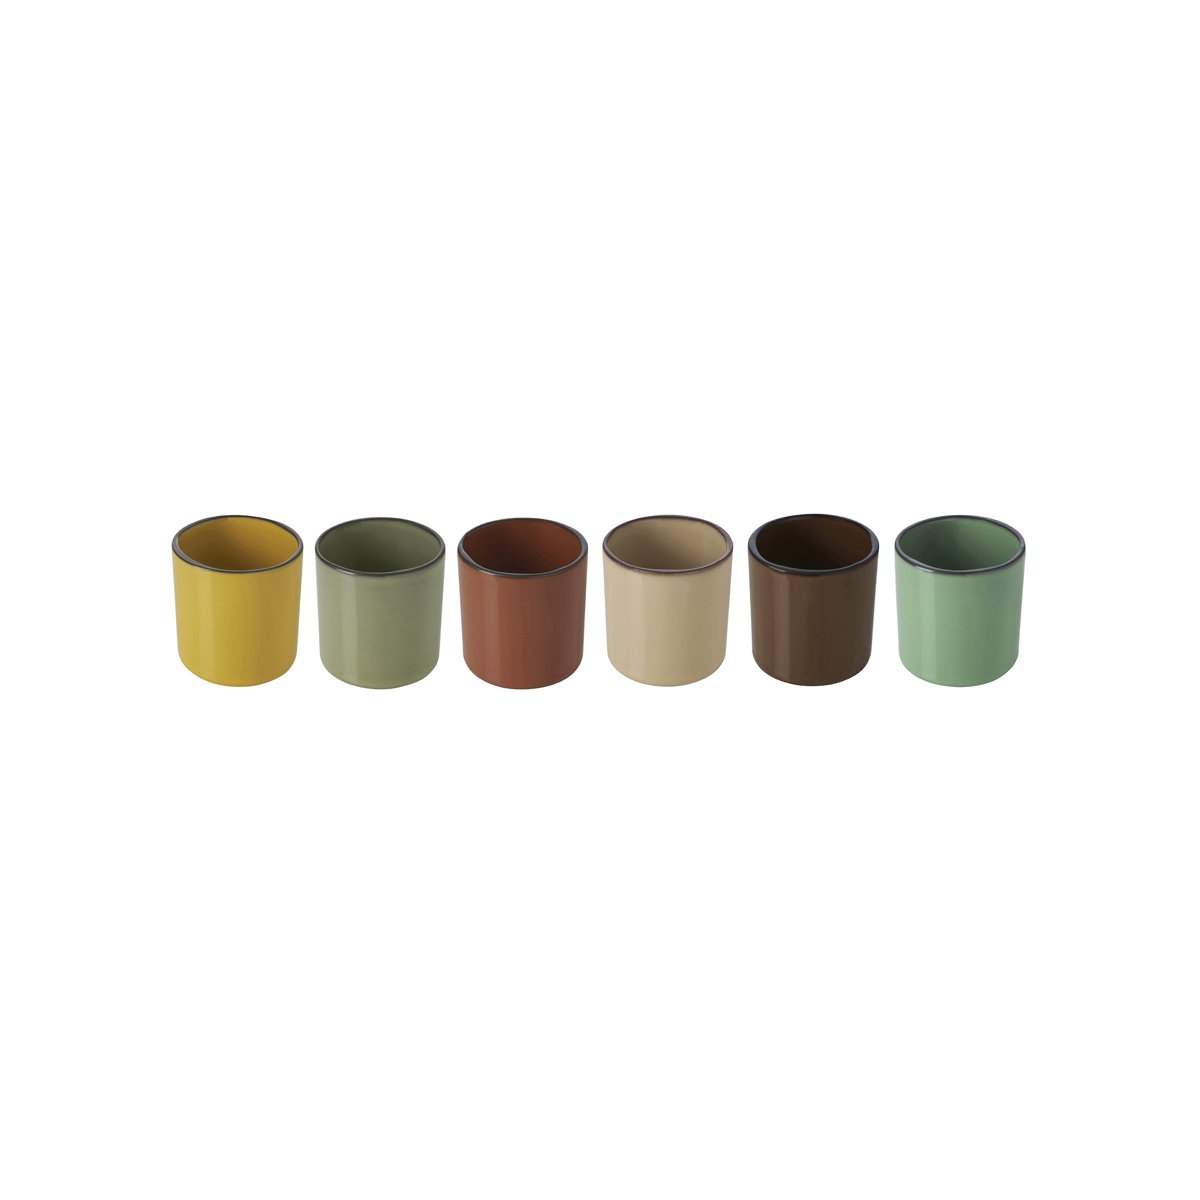 RV652999 Revol Caractere White Cumulus Cup Set 6pc Mixed Colours 80ml Tomkin Australia Hospitality Supplies